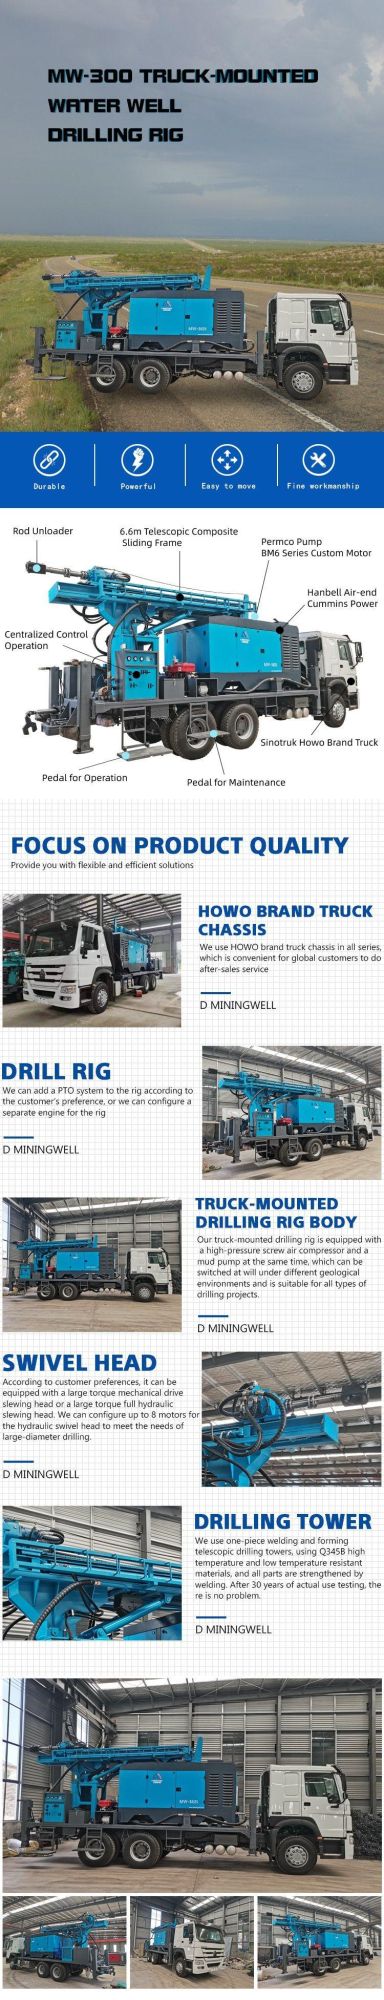 Dminingwell Rg Hot Sale Truck Mounted Borehole Water Well Drill Rig